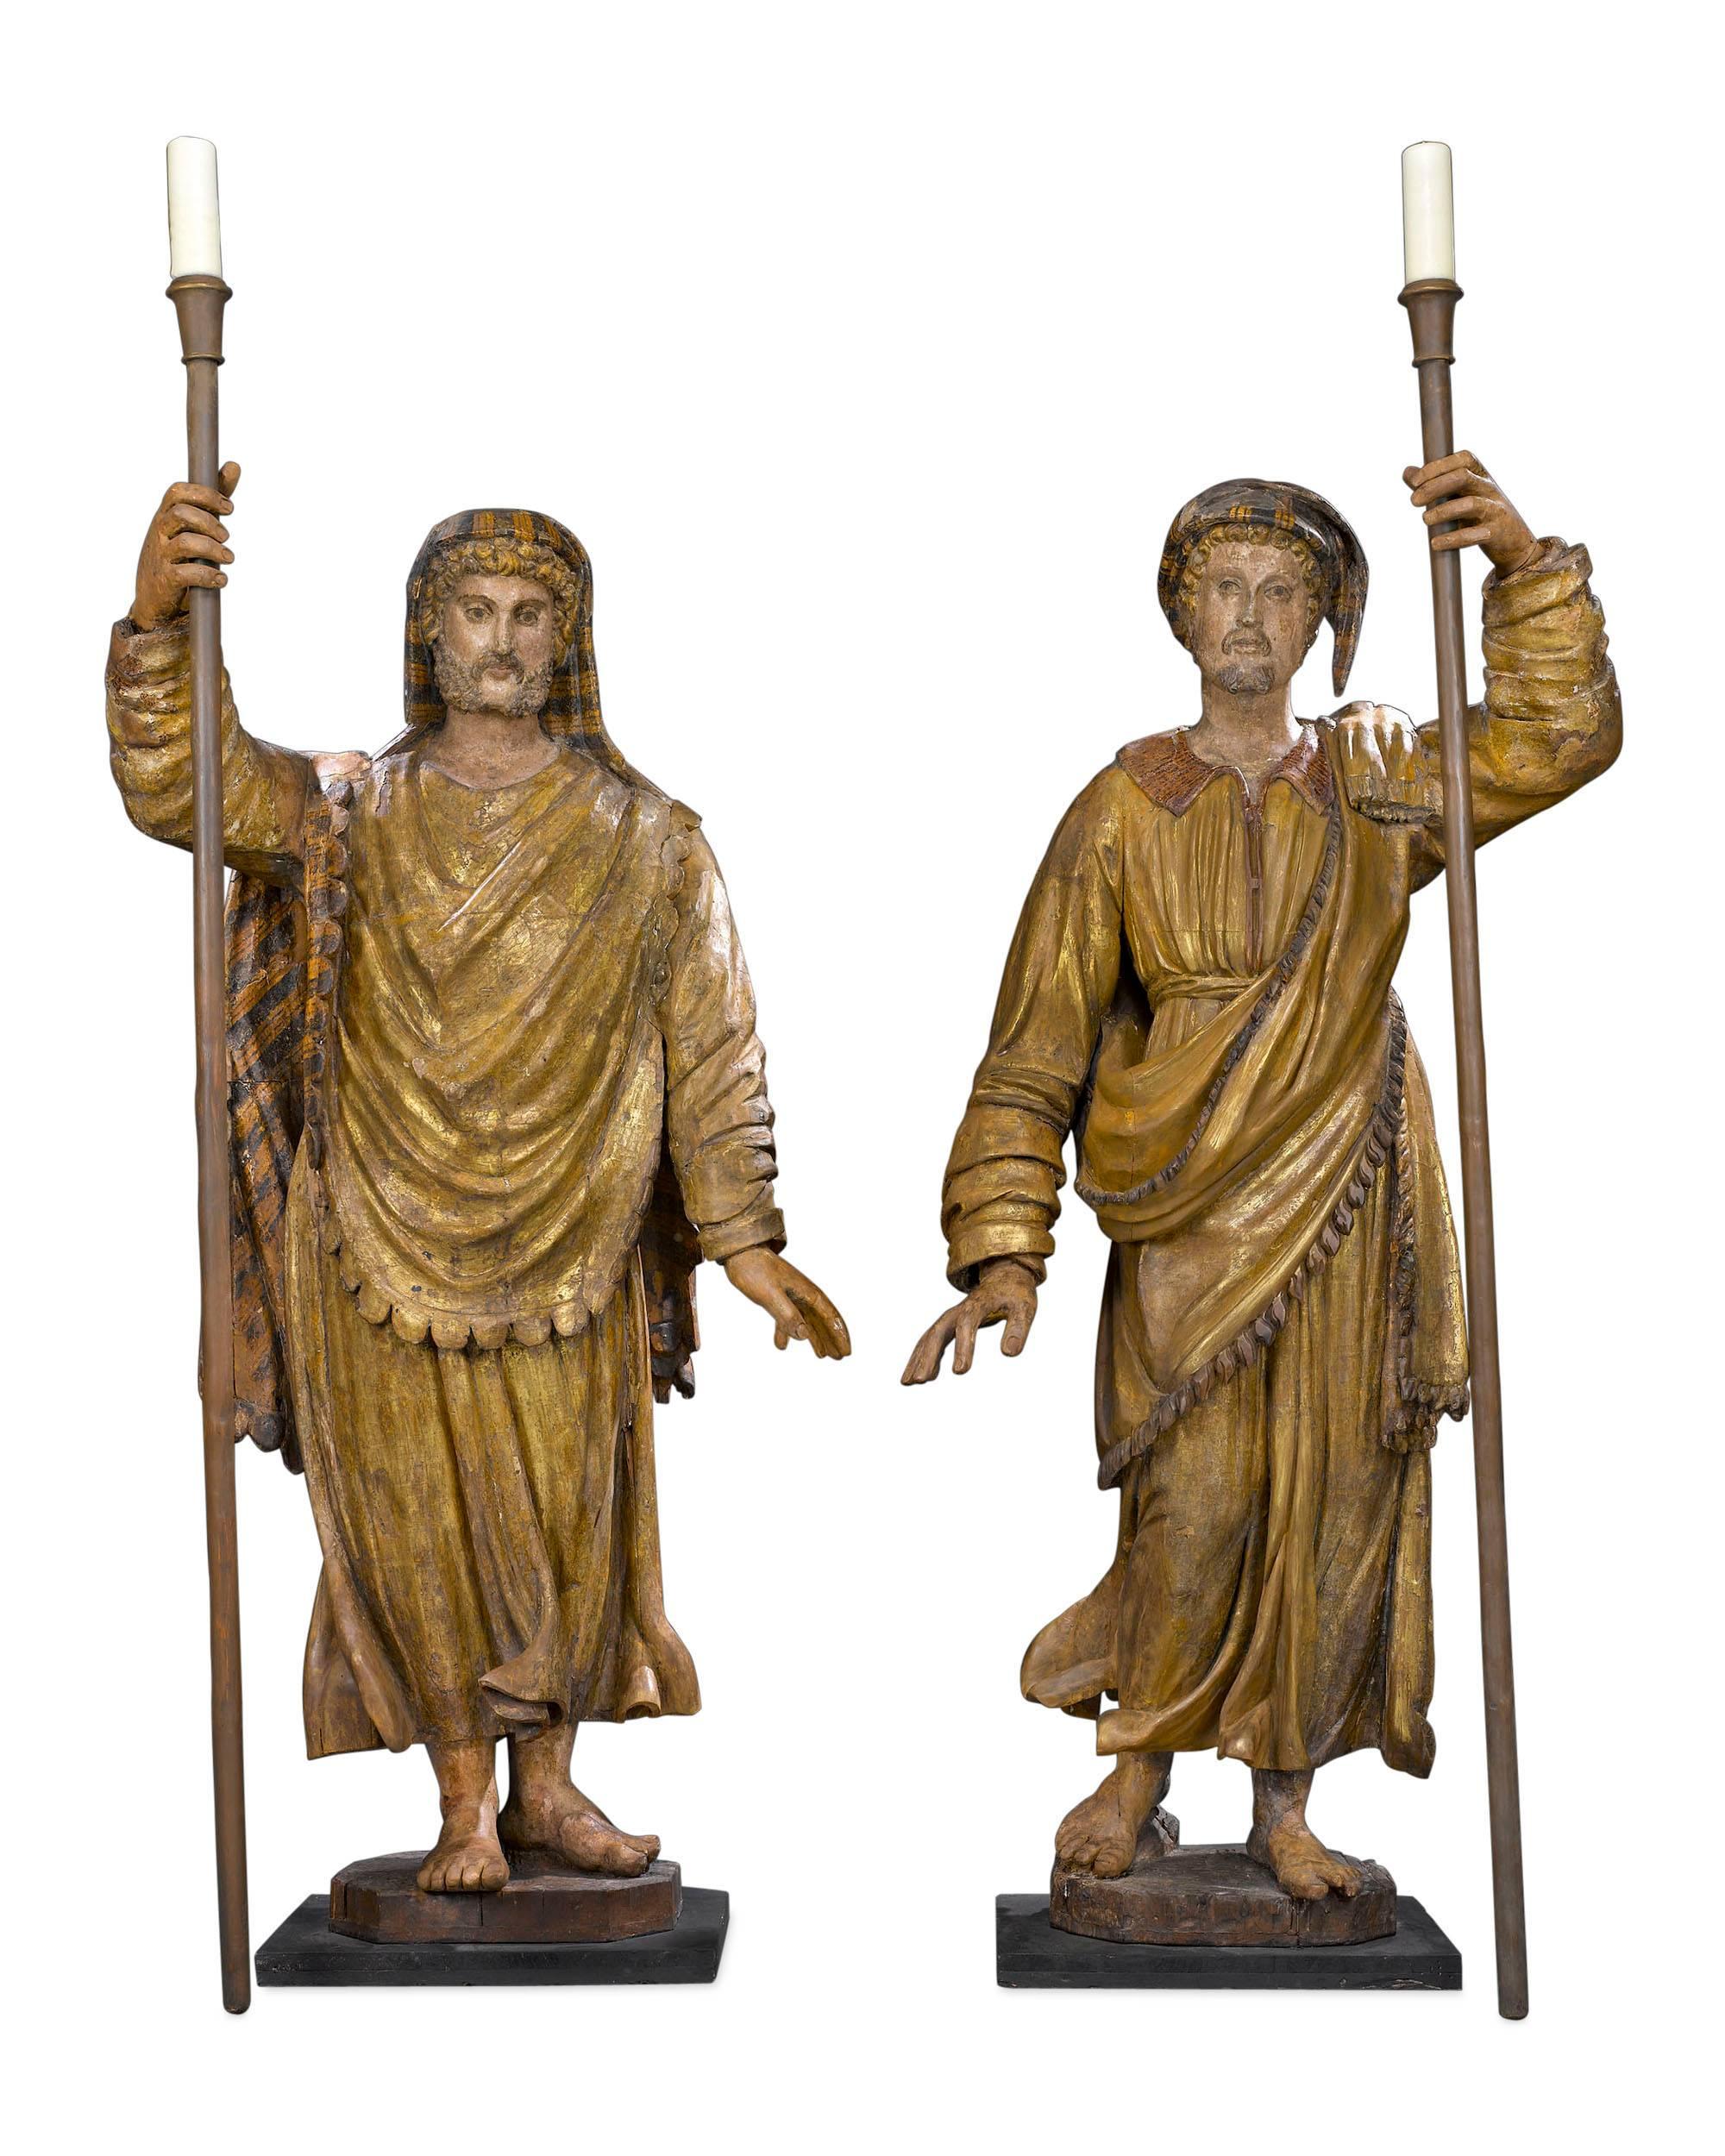 Awe-inspiring in size and artistry, these incredible Venetian figural torchères pay homage to two of Italy’s most celebrated merchant explorers–Marco Polo and Amerigo Vespucci.

Standing over nine feet high, these impressive carved wood sculptures